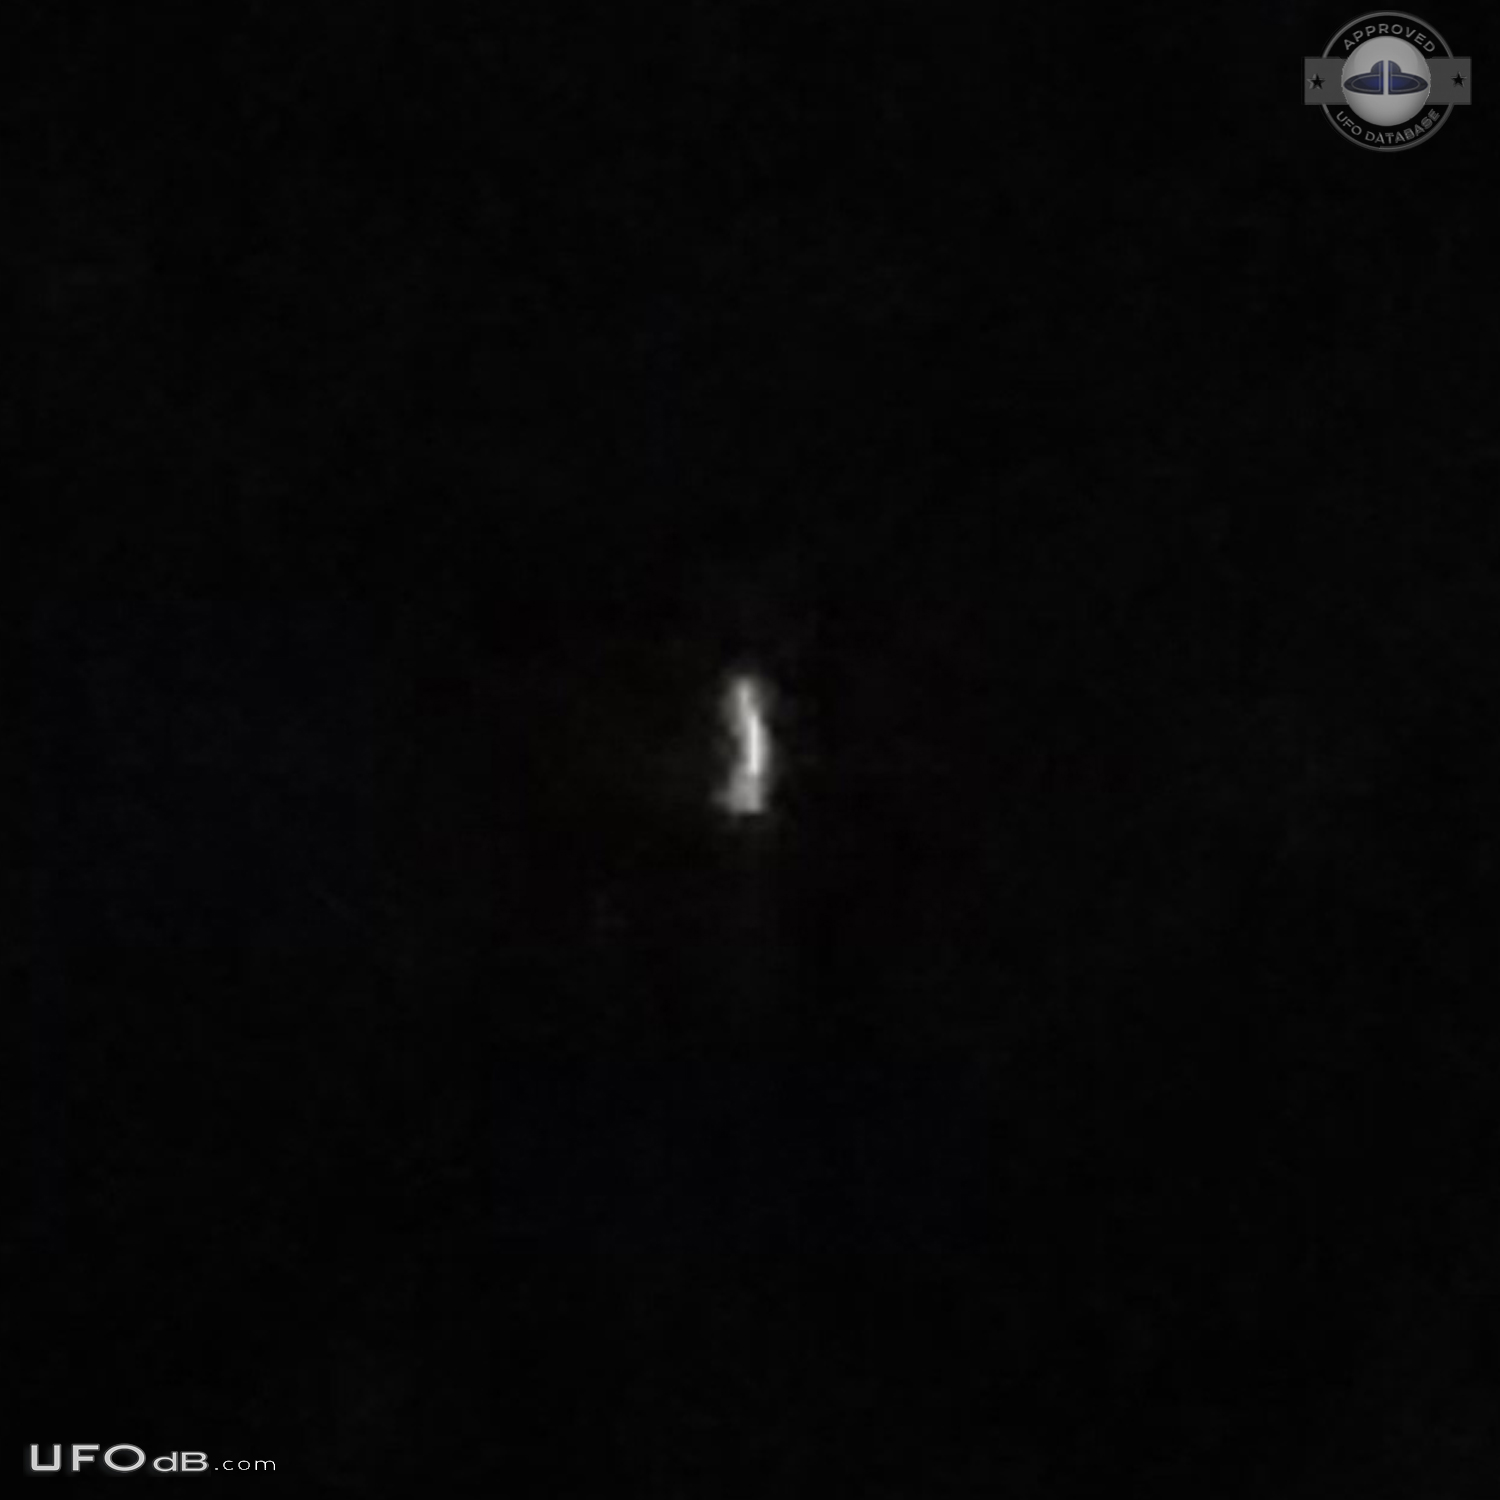 Looked like a star far, closer you could see it was UFO triangle with  UFO Picture #724-5